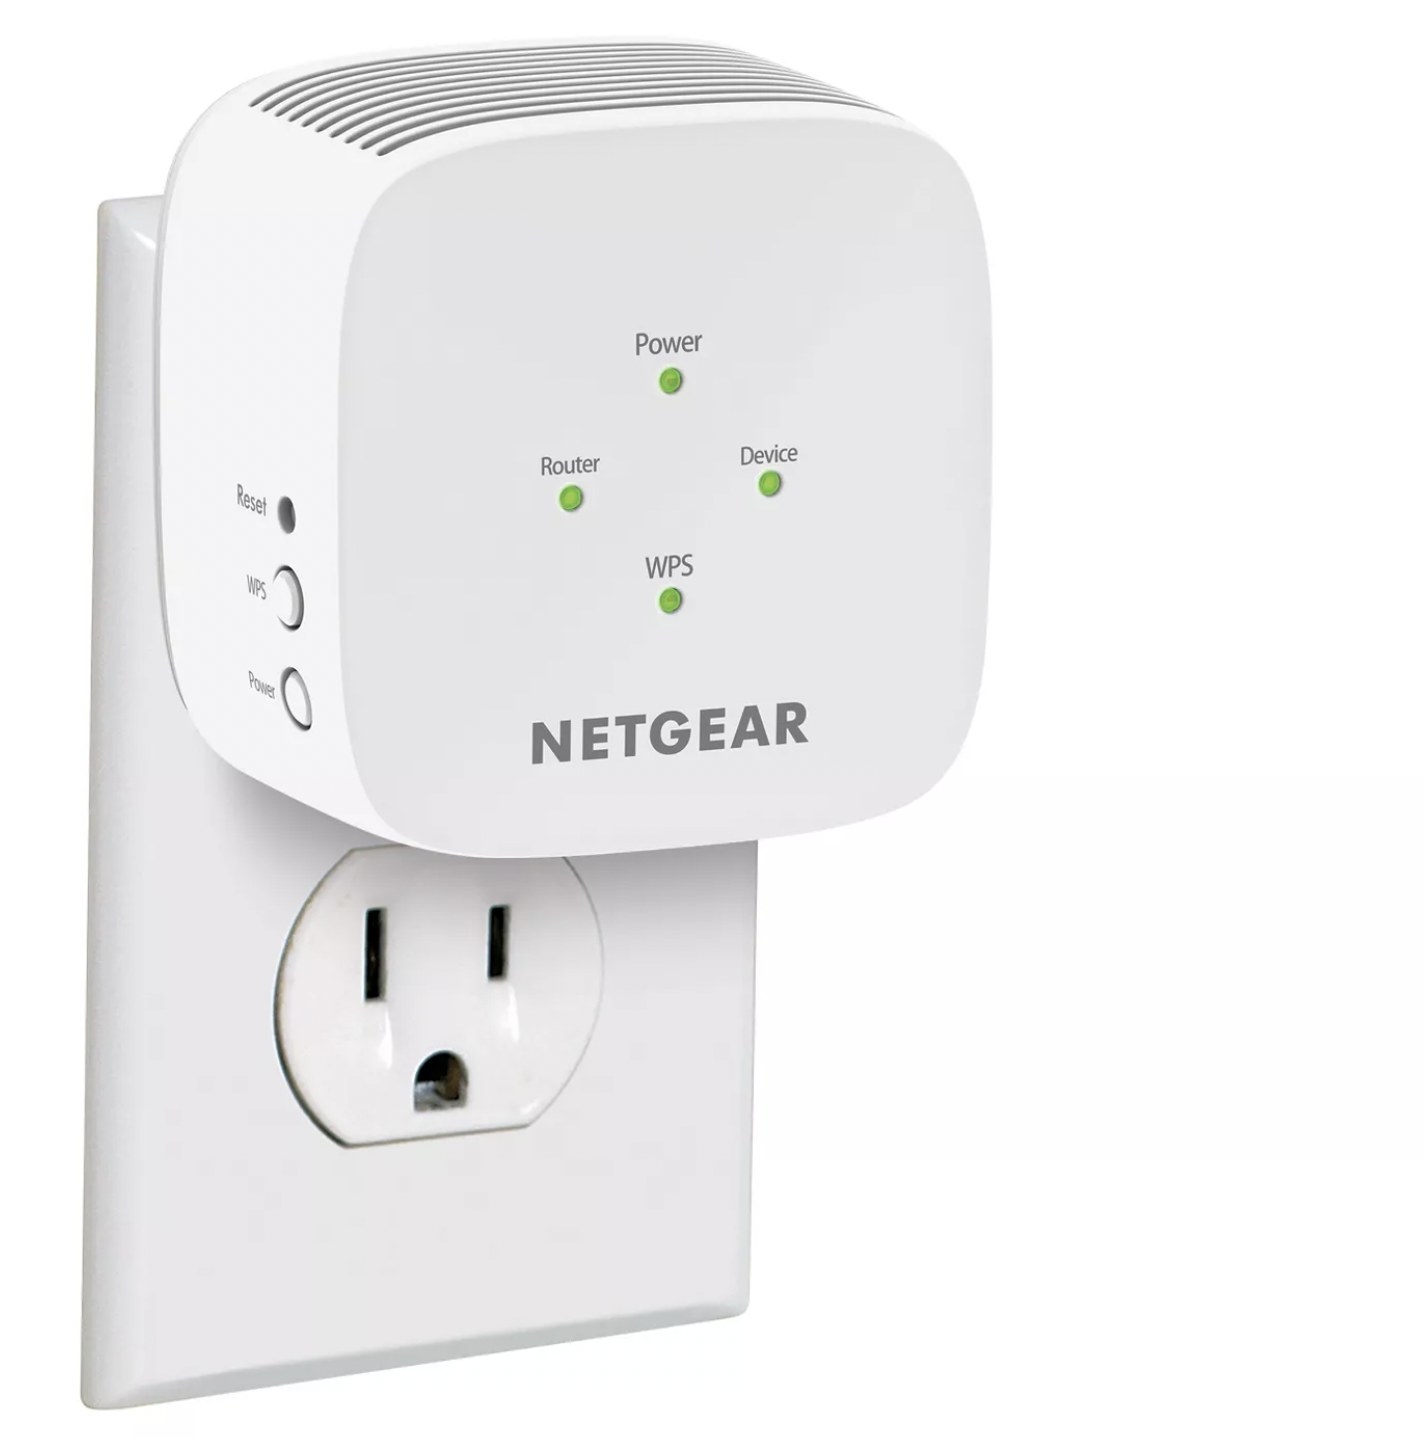 The Netgear extender plugged into an outlet